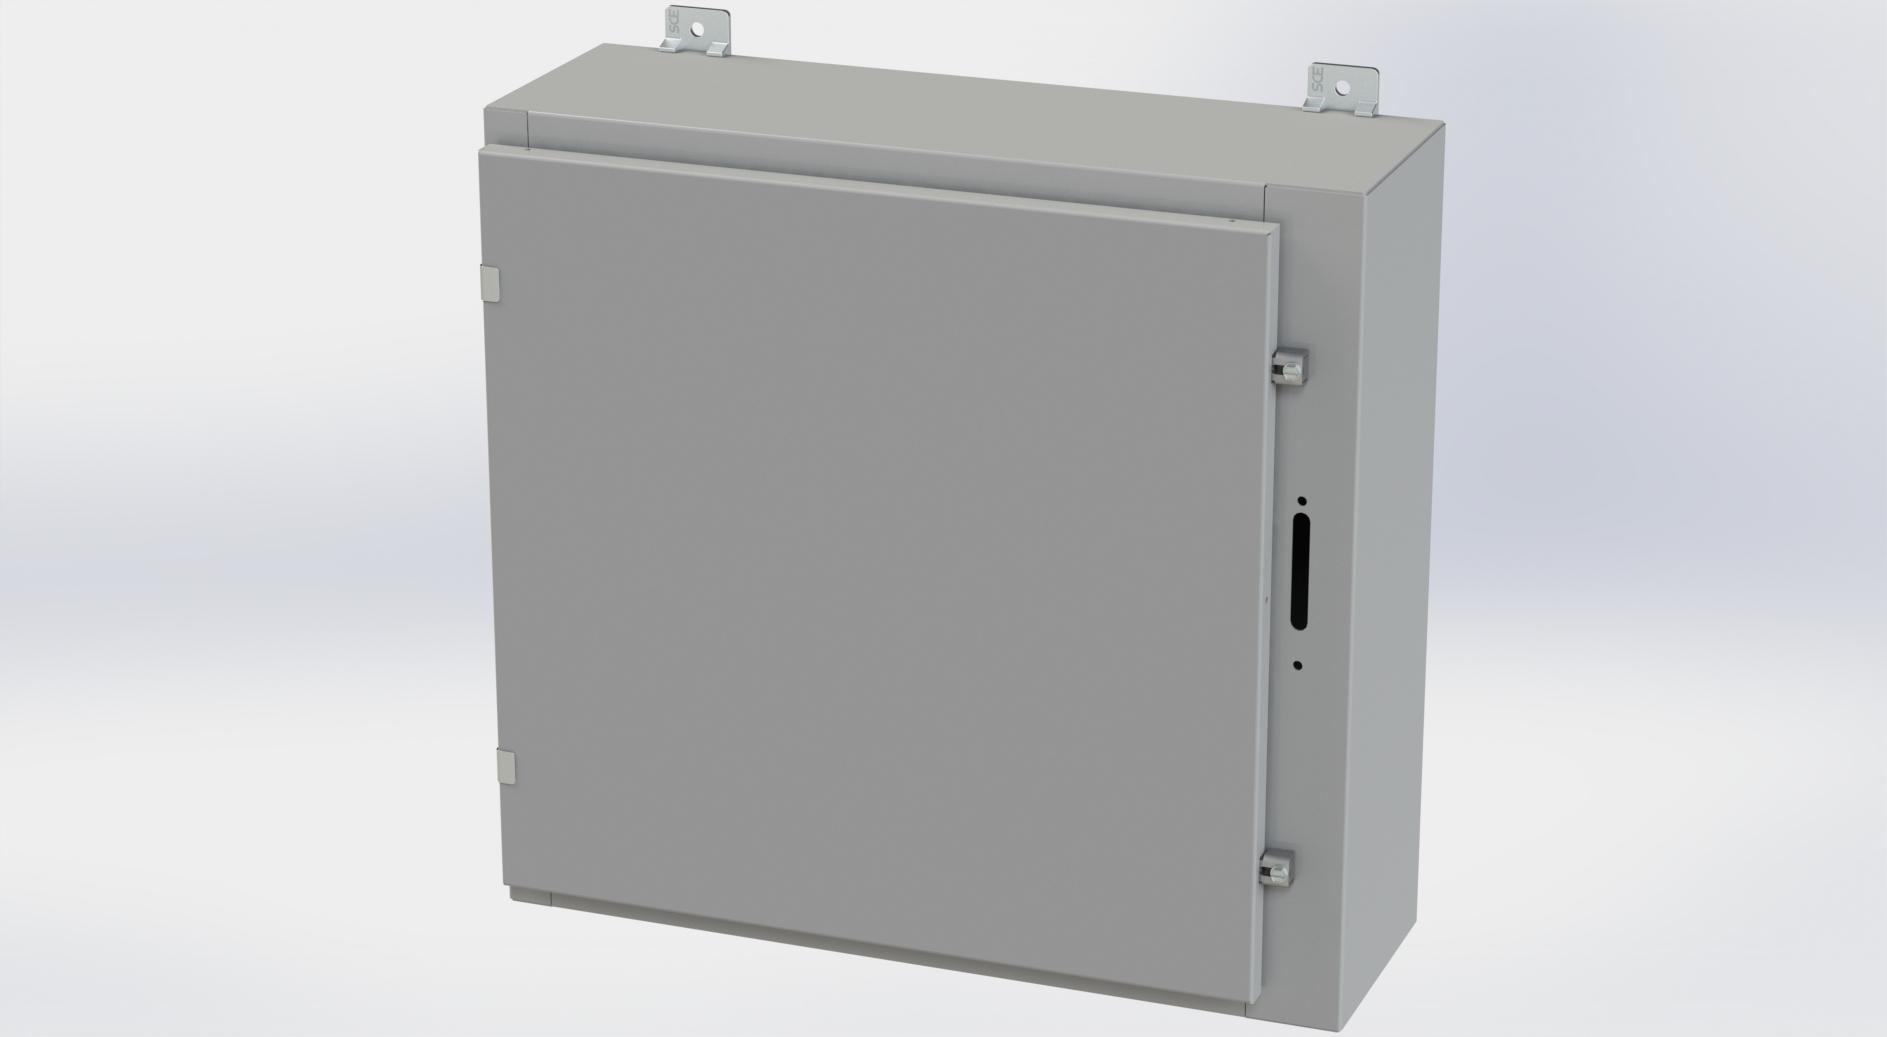 Saginaw Control SCE-24HS2508LP HS LP Enclosure, Height:24.00", Width:25.38", Depth:8.00", ANSI-61 gray powder coating inside and out. Optional sub-panels are powder coated white.